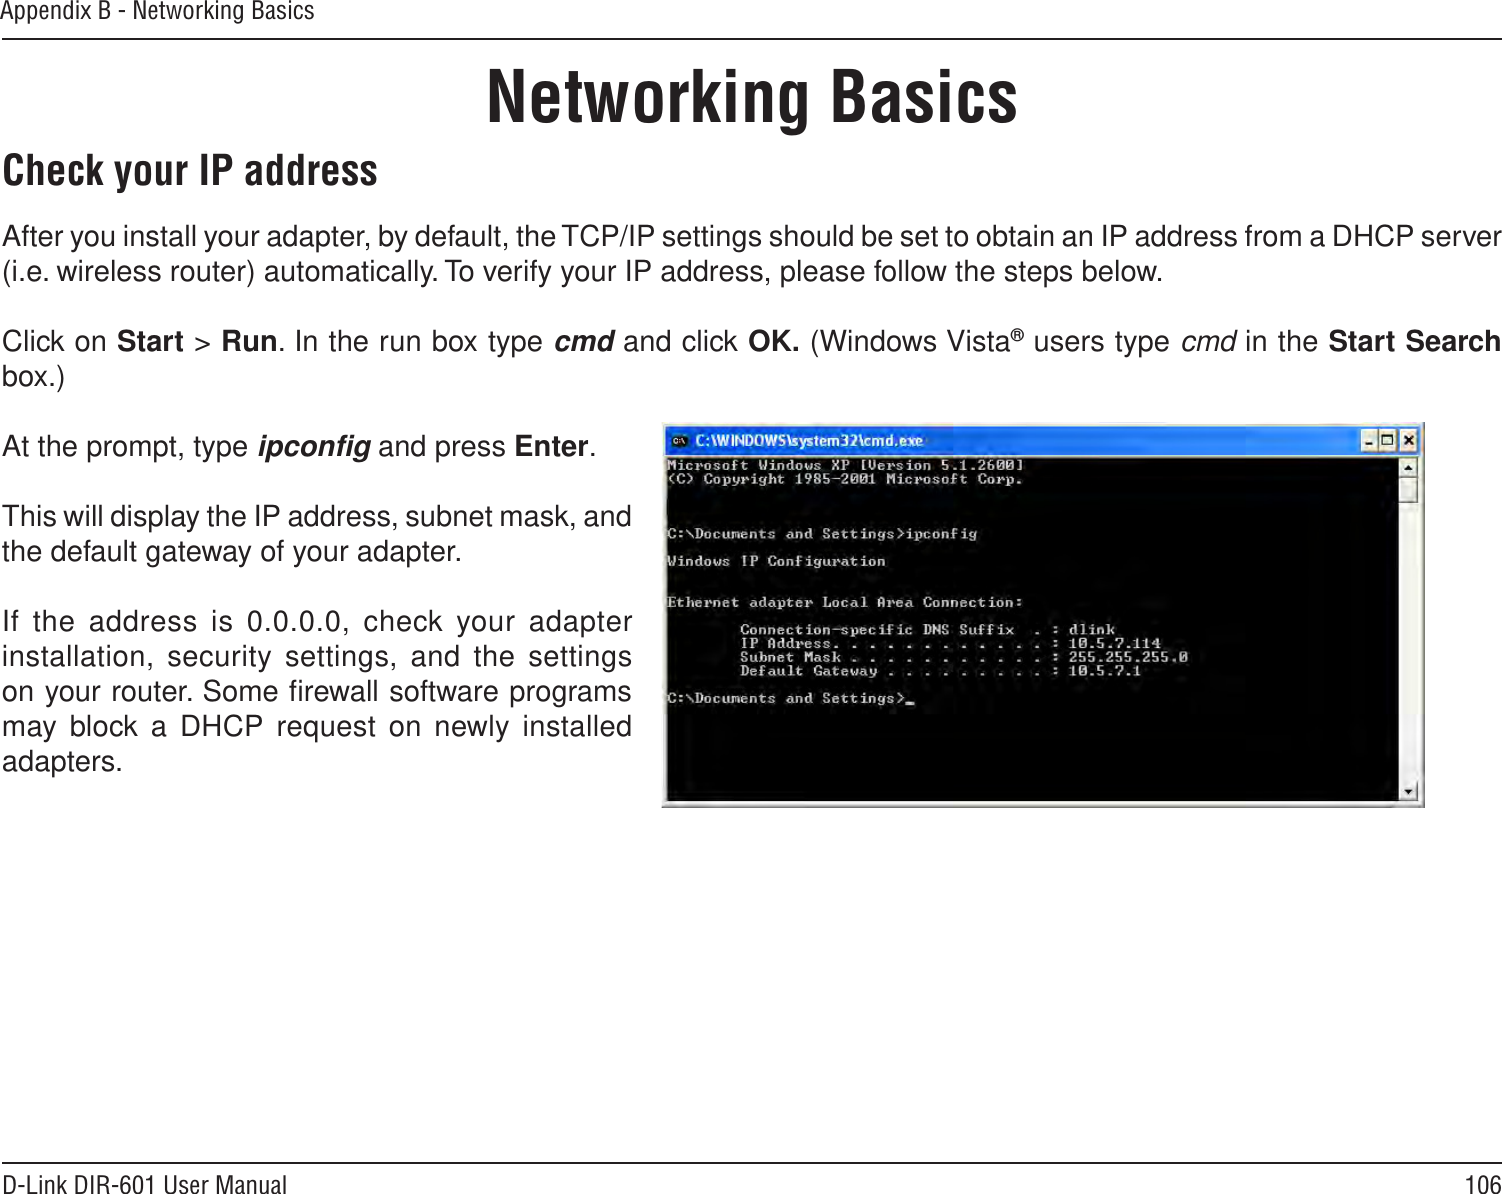 106D-Link DIR-601 User ManualAppendix B - Networking BasicsNetworking BasicsCheck your IP addressAfter you install your adapter, by default, the TCP/IP settings should be set to obtain an IP address from a DHCP server (i.e. wireless router) automatically. To verify your IP address, please follow the steps below.Click on Start &gt; Run. In the run box type cmd and click OK. (Windows Vista® users type cmd in the Start Search box.)At the prompt, type ipconﬁg and press Enter.This will display the IP address, subnet mask, and the default gateway of your adapter.If the address is 0.0.0.0,  check your adapter installation, security settings, and the settings on your router. Some ﬁrewall software programs may block a DHCP request on newly installed adapters. 